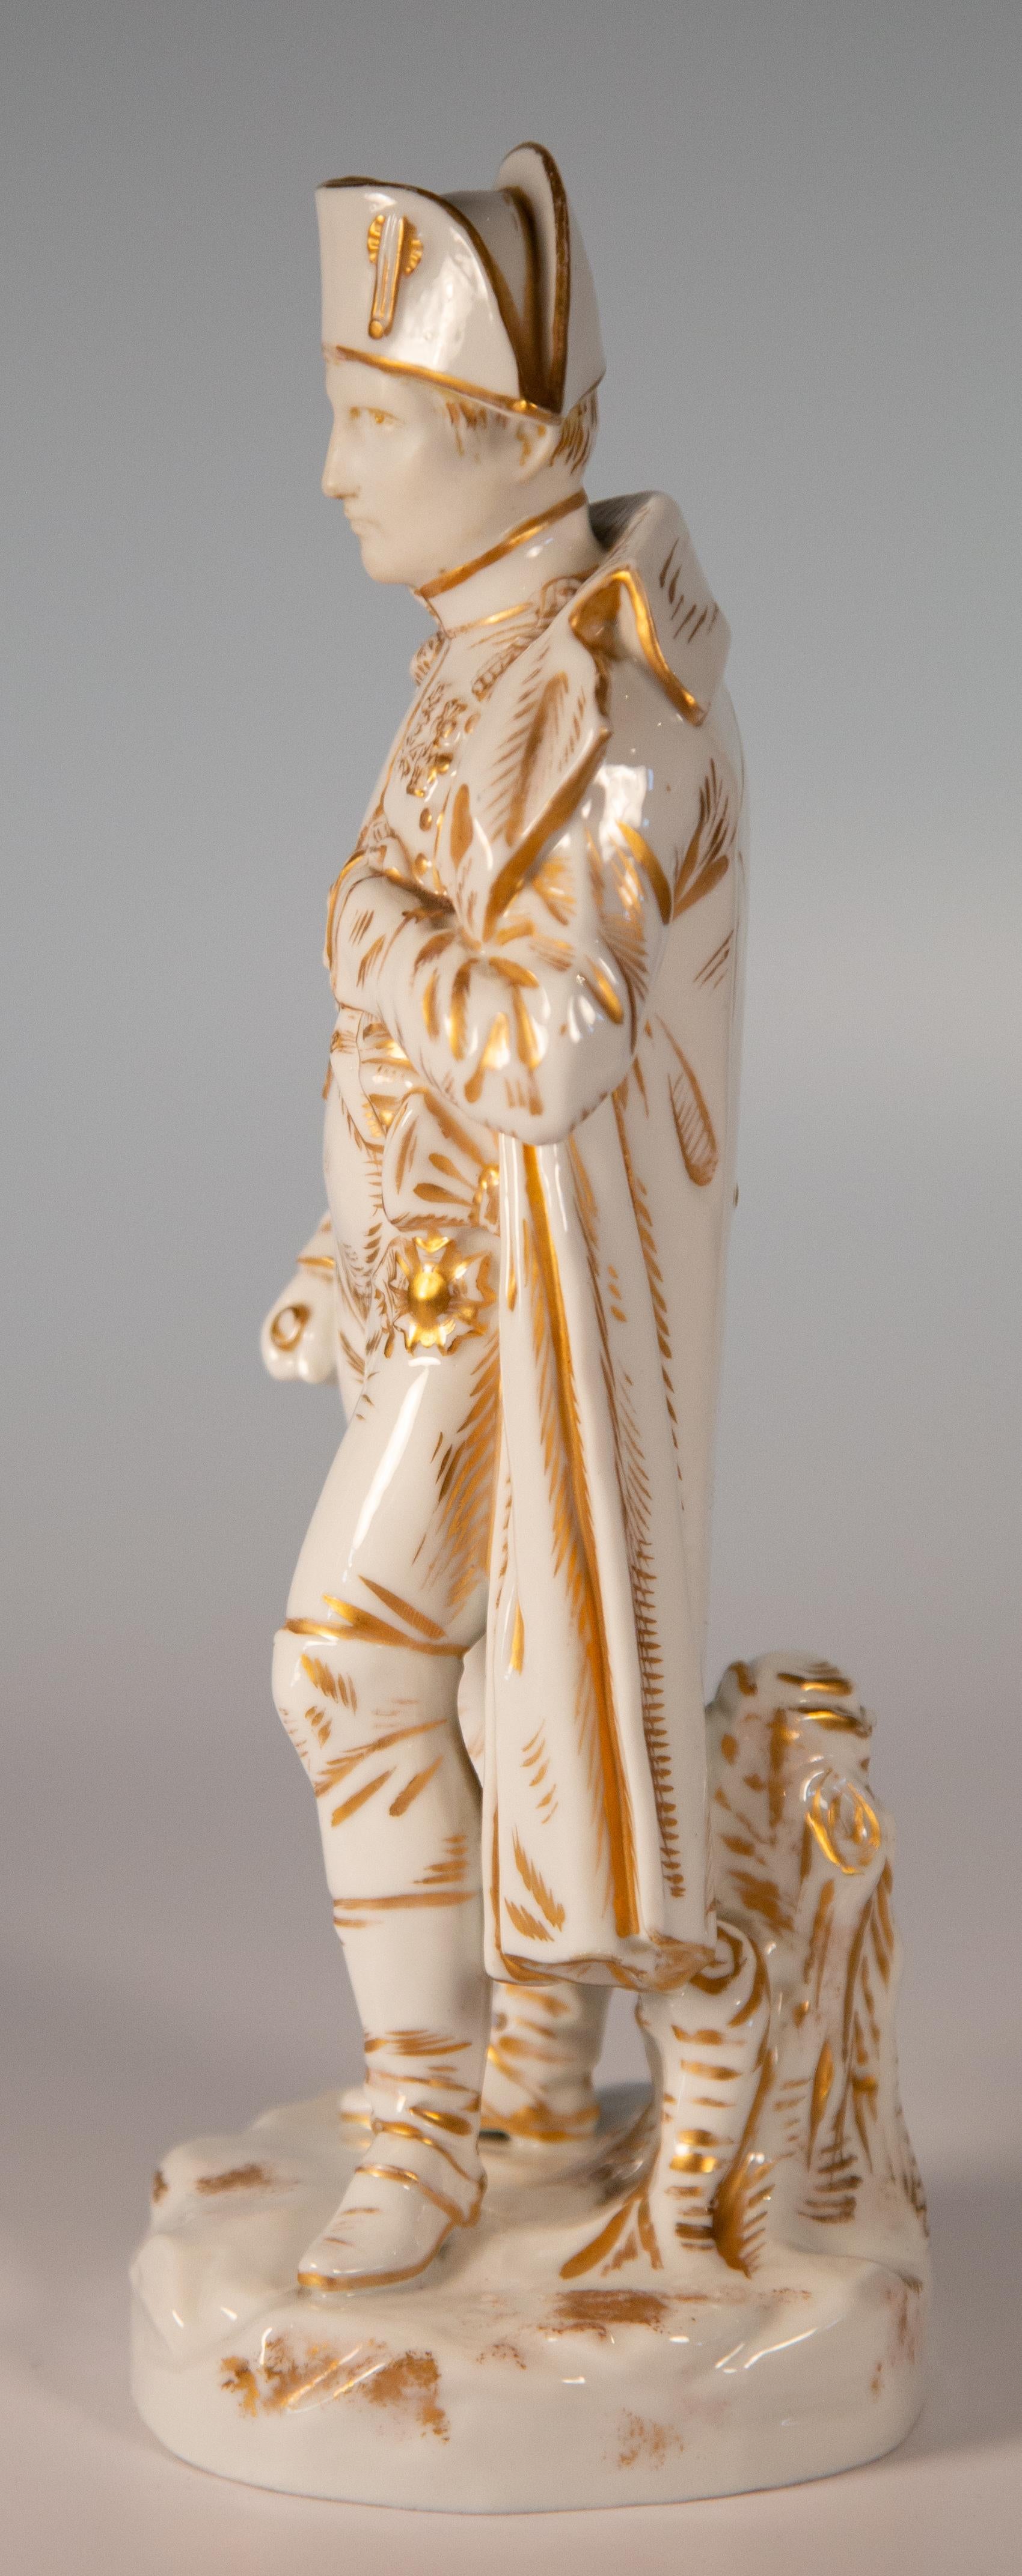 Late 19th century Paris porcelain standing statue of Napoleon Bonaparte, circa 1880.
White porcelain with gilt decoration. Contrasting bisque face with gazing eyes.
Classic pose with the left arm tucked into the shirt vest.